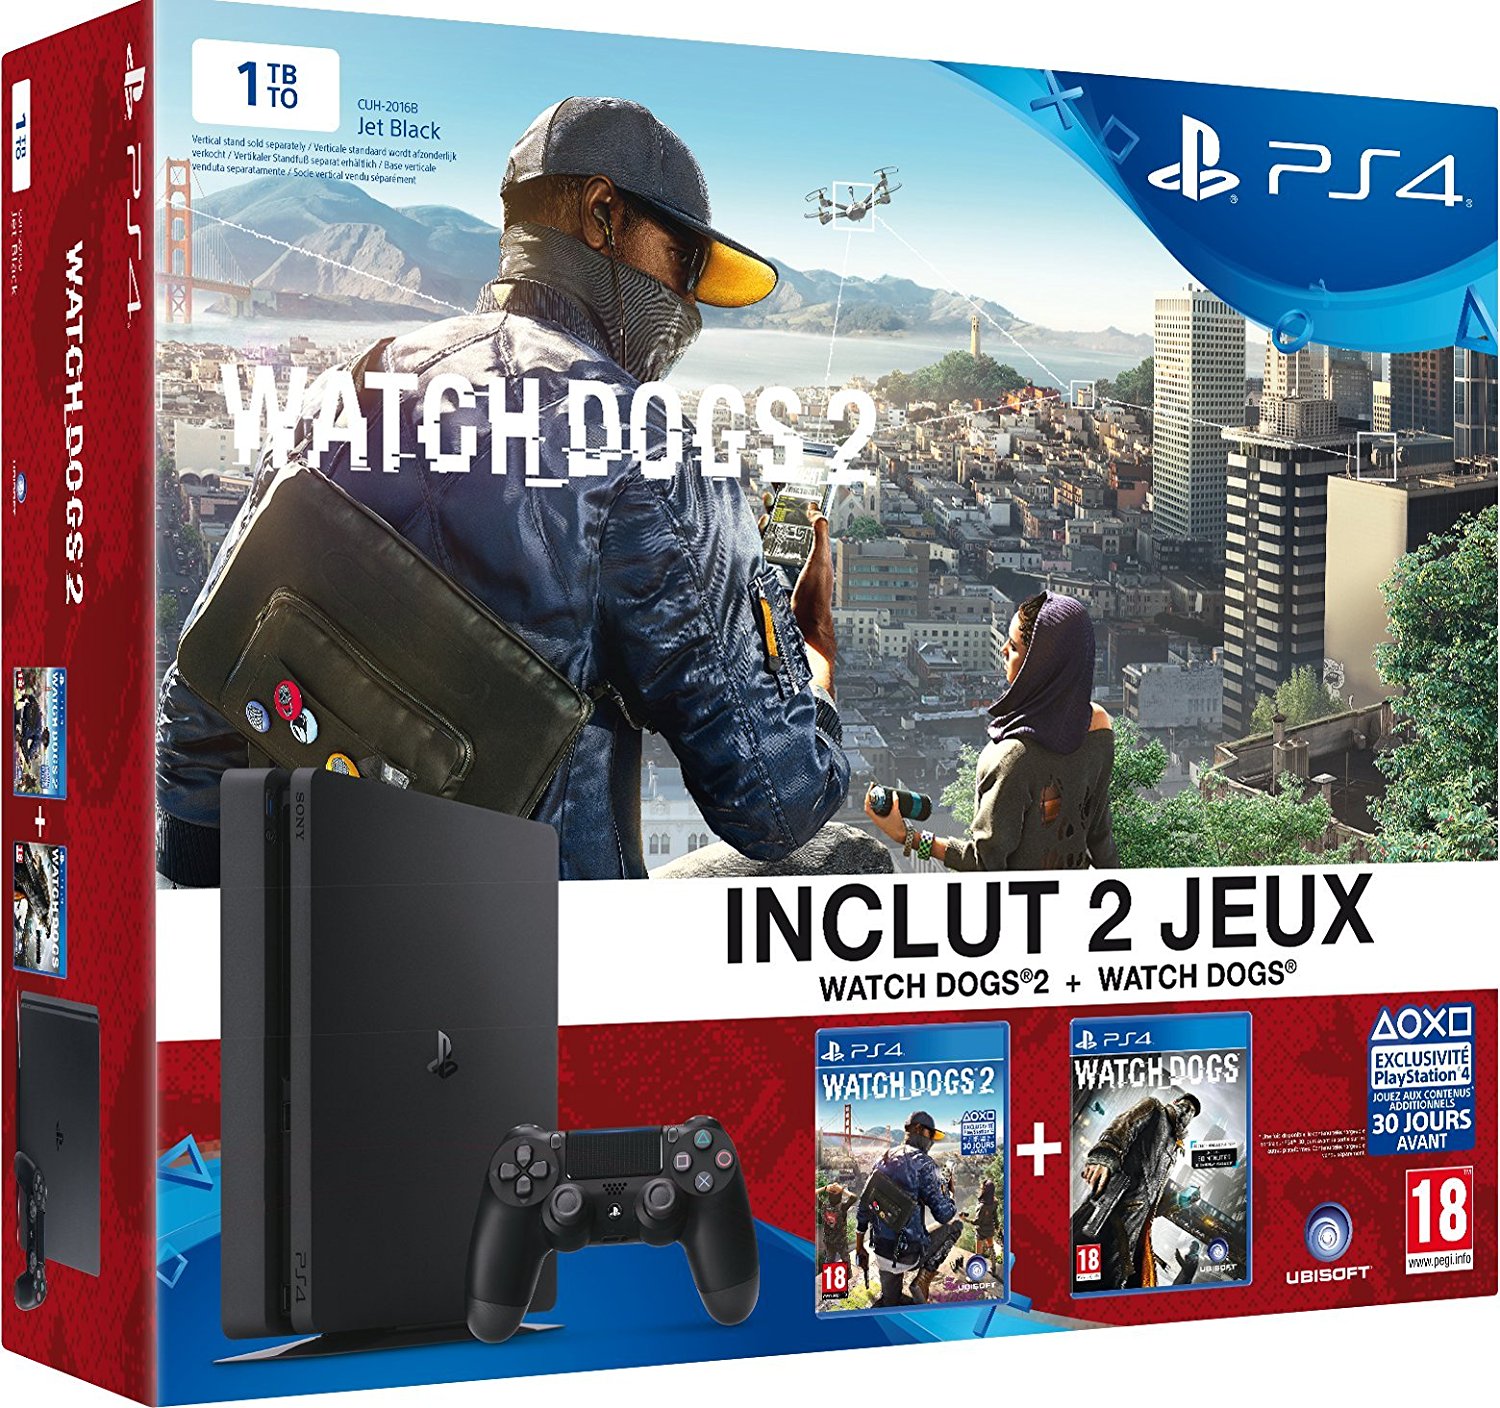 Ps4 1 to watch dogs 2 et 1 5